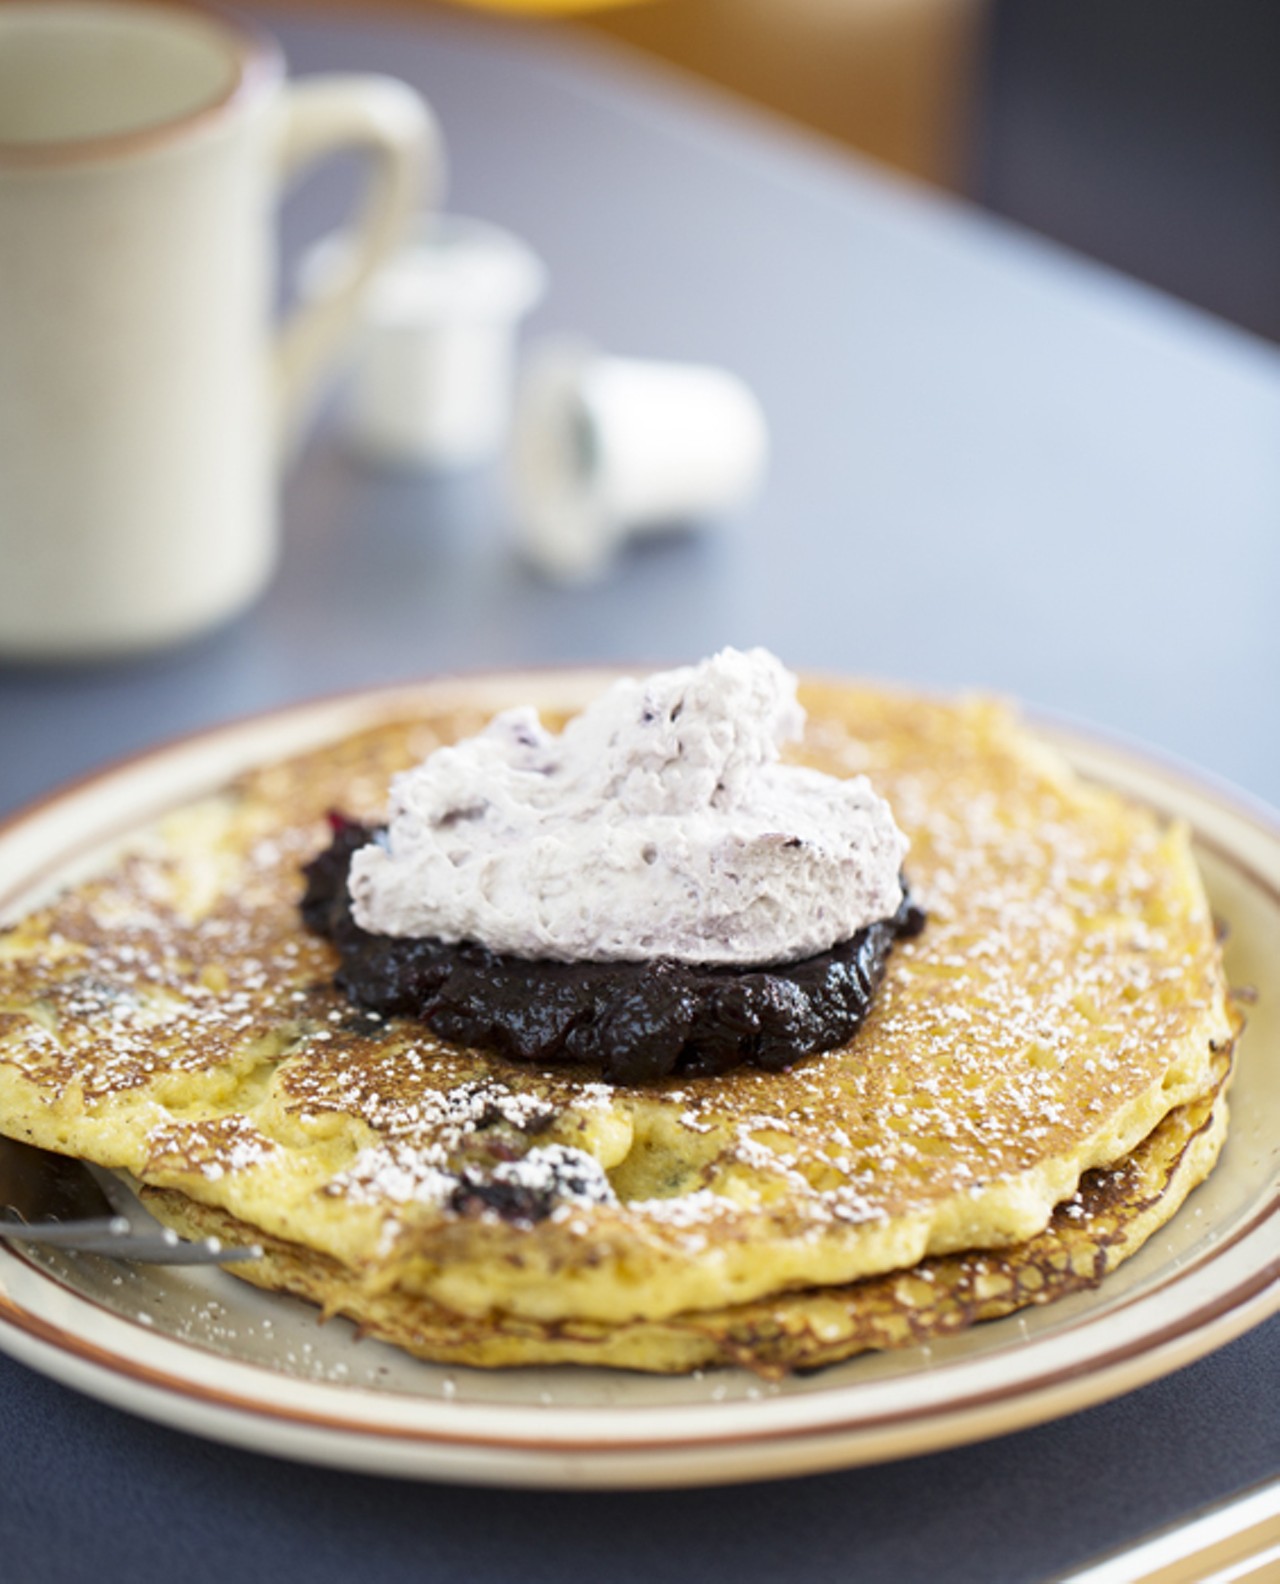 A current special, triple blueberry pancakes, takes their regular Buttermilk Cornmeal Pancakes, and adds blueberries to the batter. Topped with both blueberry compote and blueberry whipped cream.